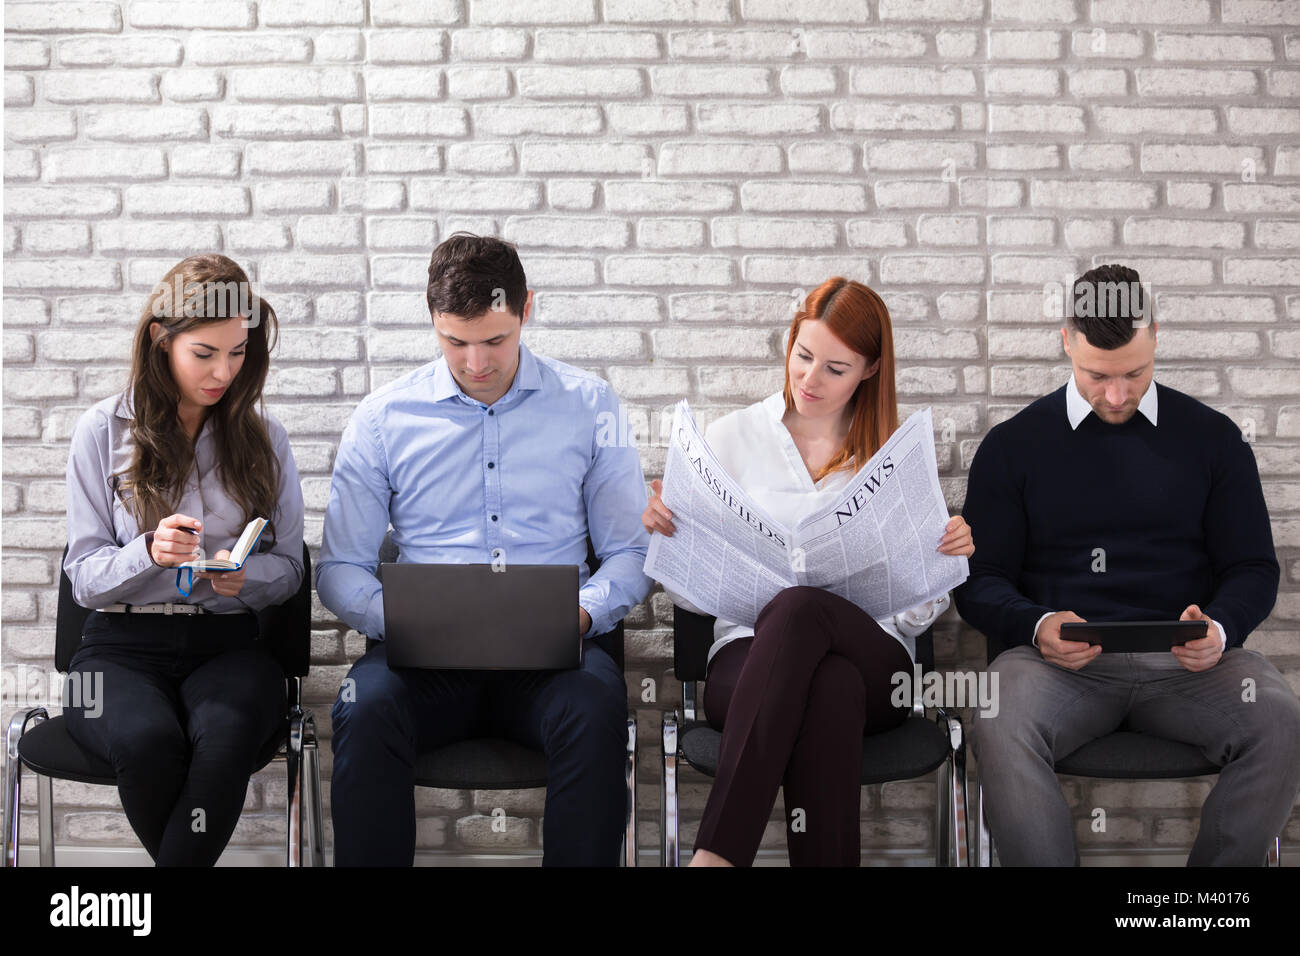 Group Of Candidate Sitting On Chair Waiting For Job Interview Against White Brick Wall Stock Photo